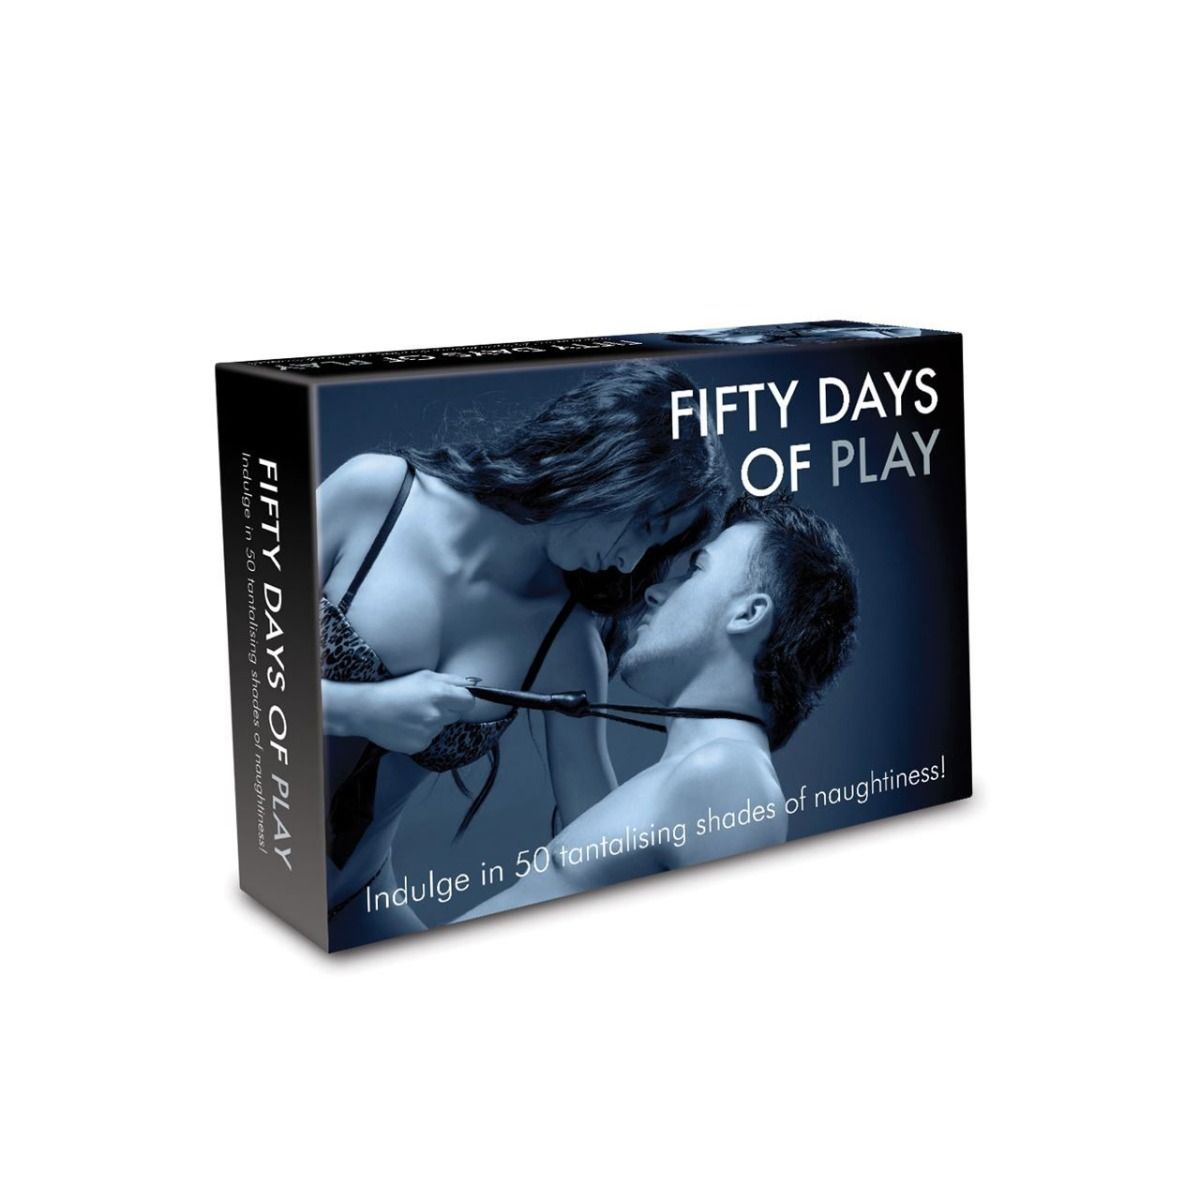 Easing you into a tantalizing dark playground full of your wildest fantasies. Fifty Days of Play has 50 secret envelopes, Introducing you to the world of bondage, kink and submission. Progress through 5 levels of play, ranging from intimate moments together, through stimulating scenarios, to erotic surprises. 50 Envelopes ranging through 5 shades of naughtiness.  50 Days of Play - Couple Play - Sex Game Creative Conceptions Australia